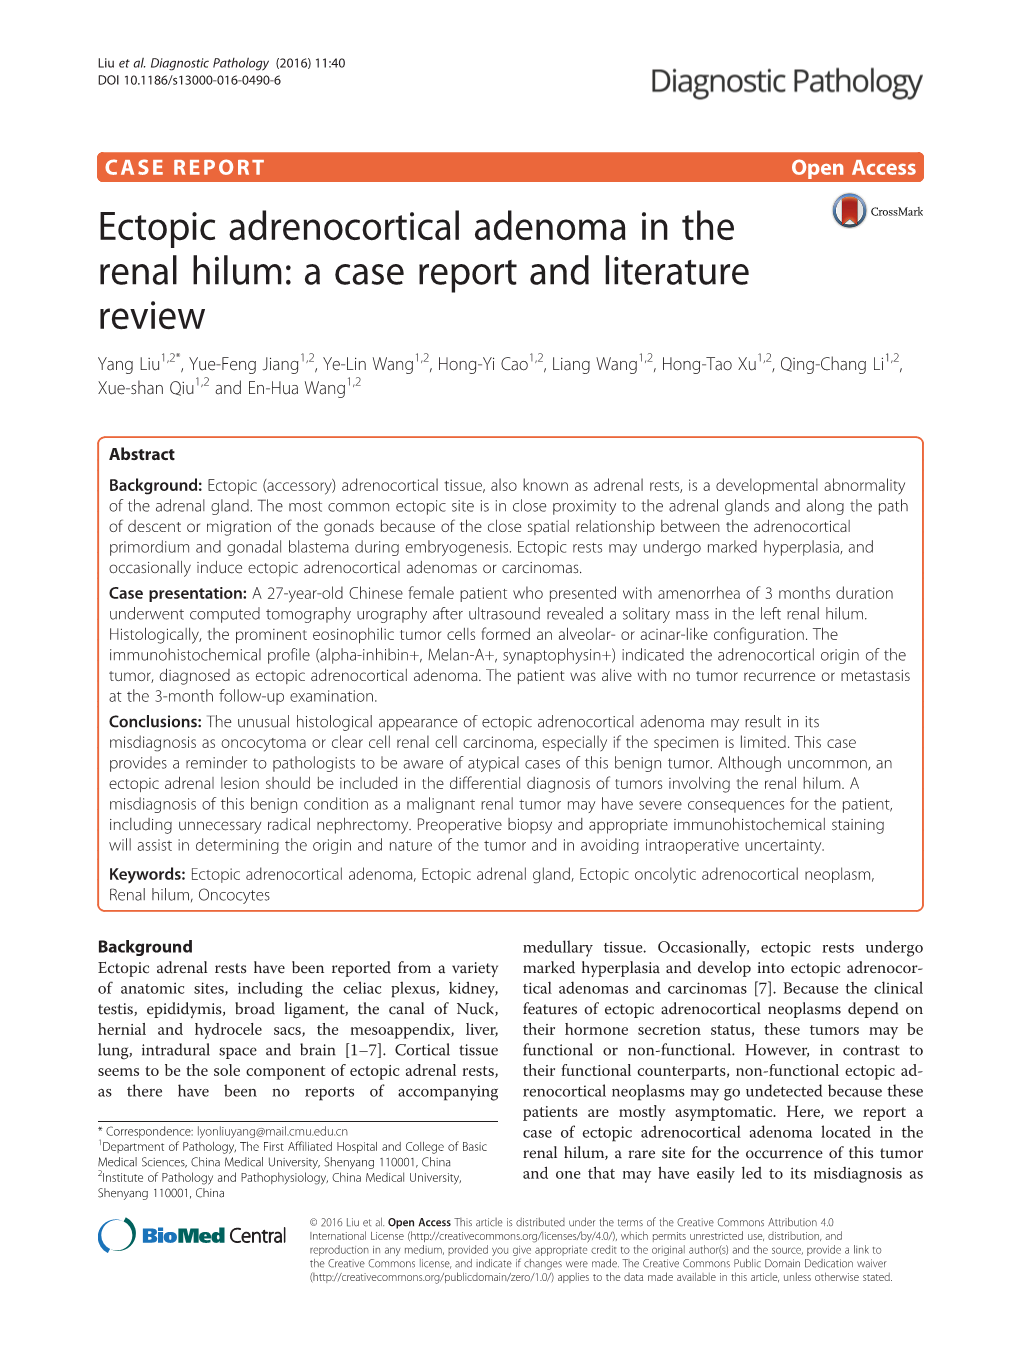 Ectopic Adrenocortical Adenoma in the Renal Hilum